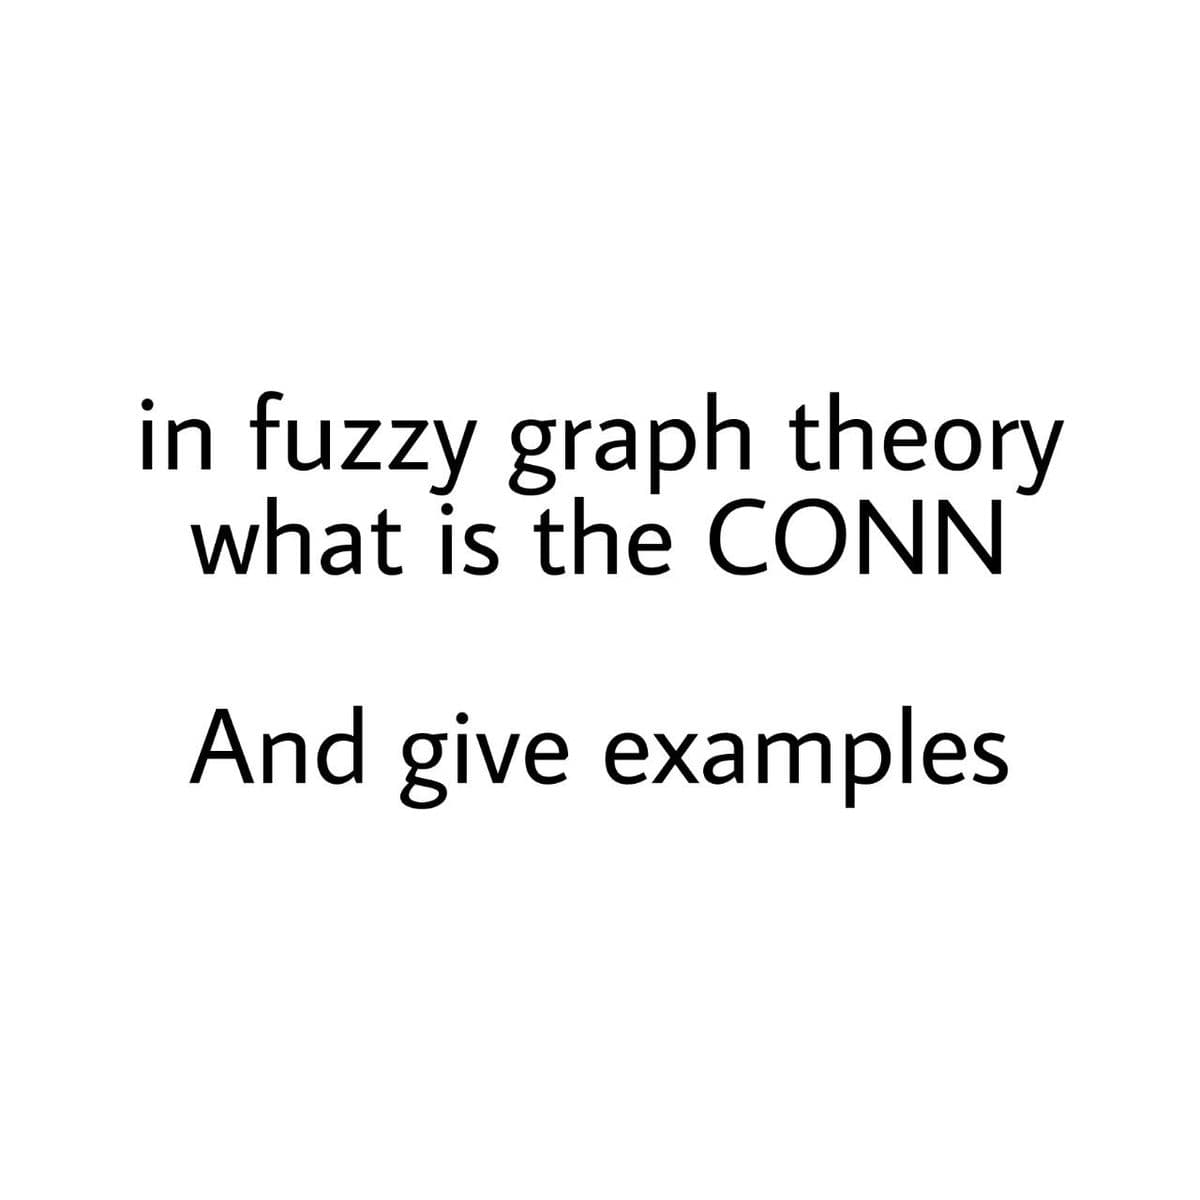 in fuzzy graph theory
what is the CONN
And give examples
